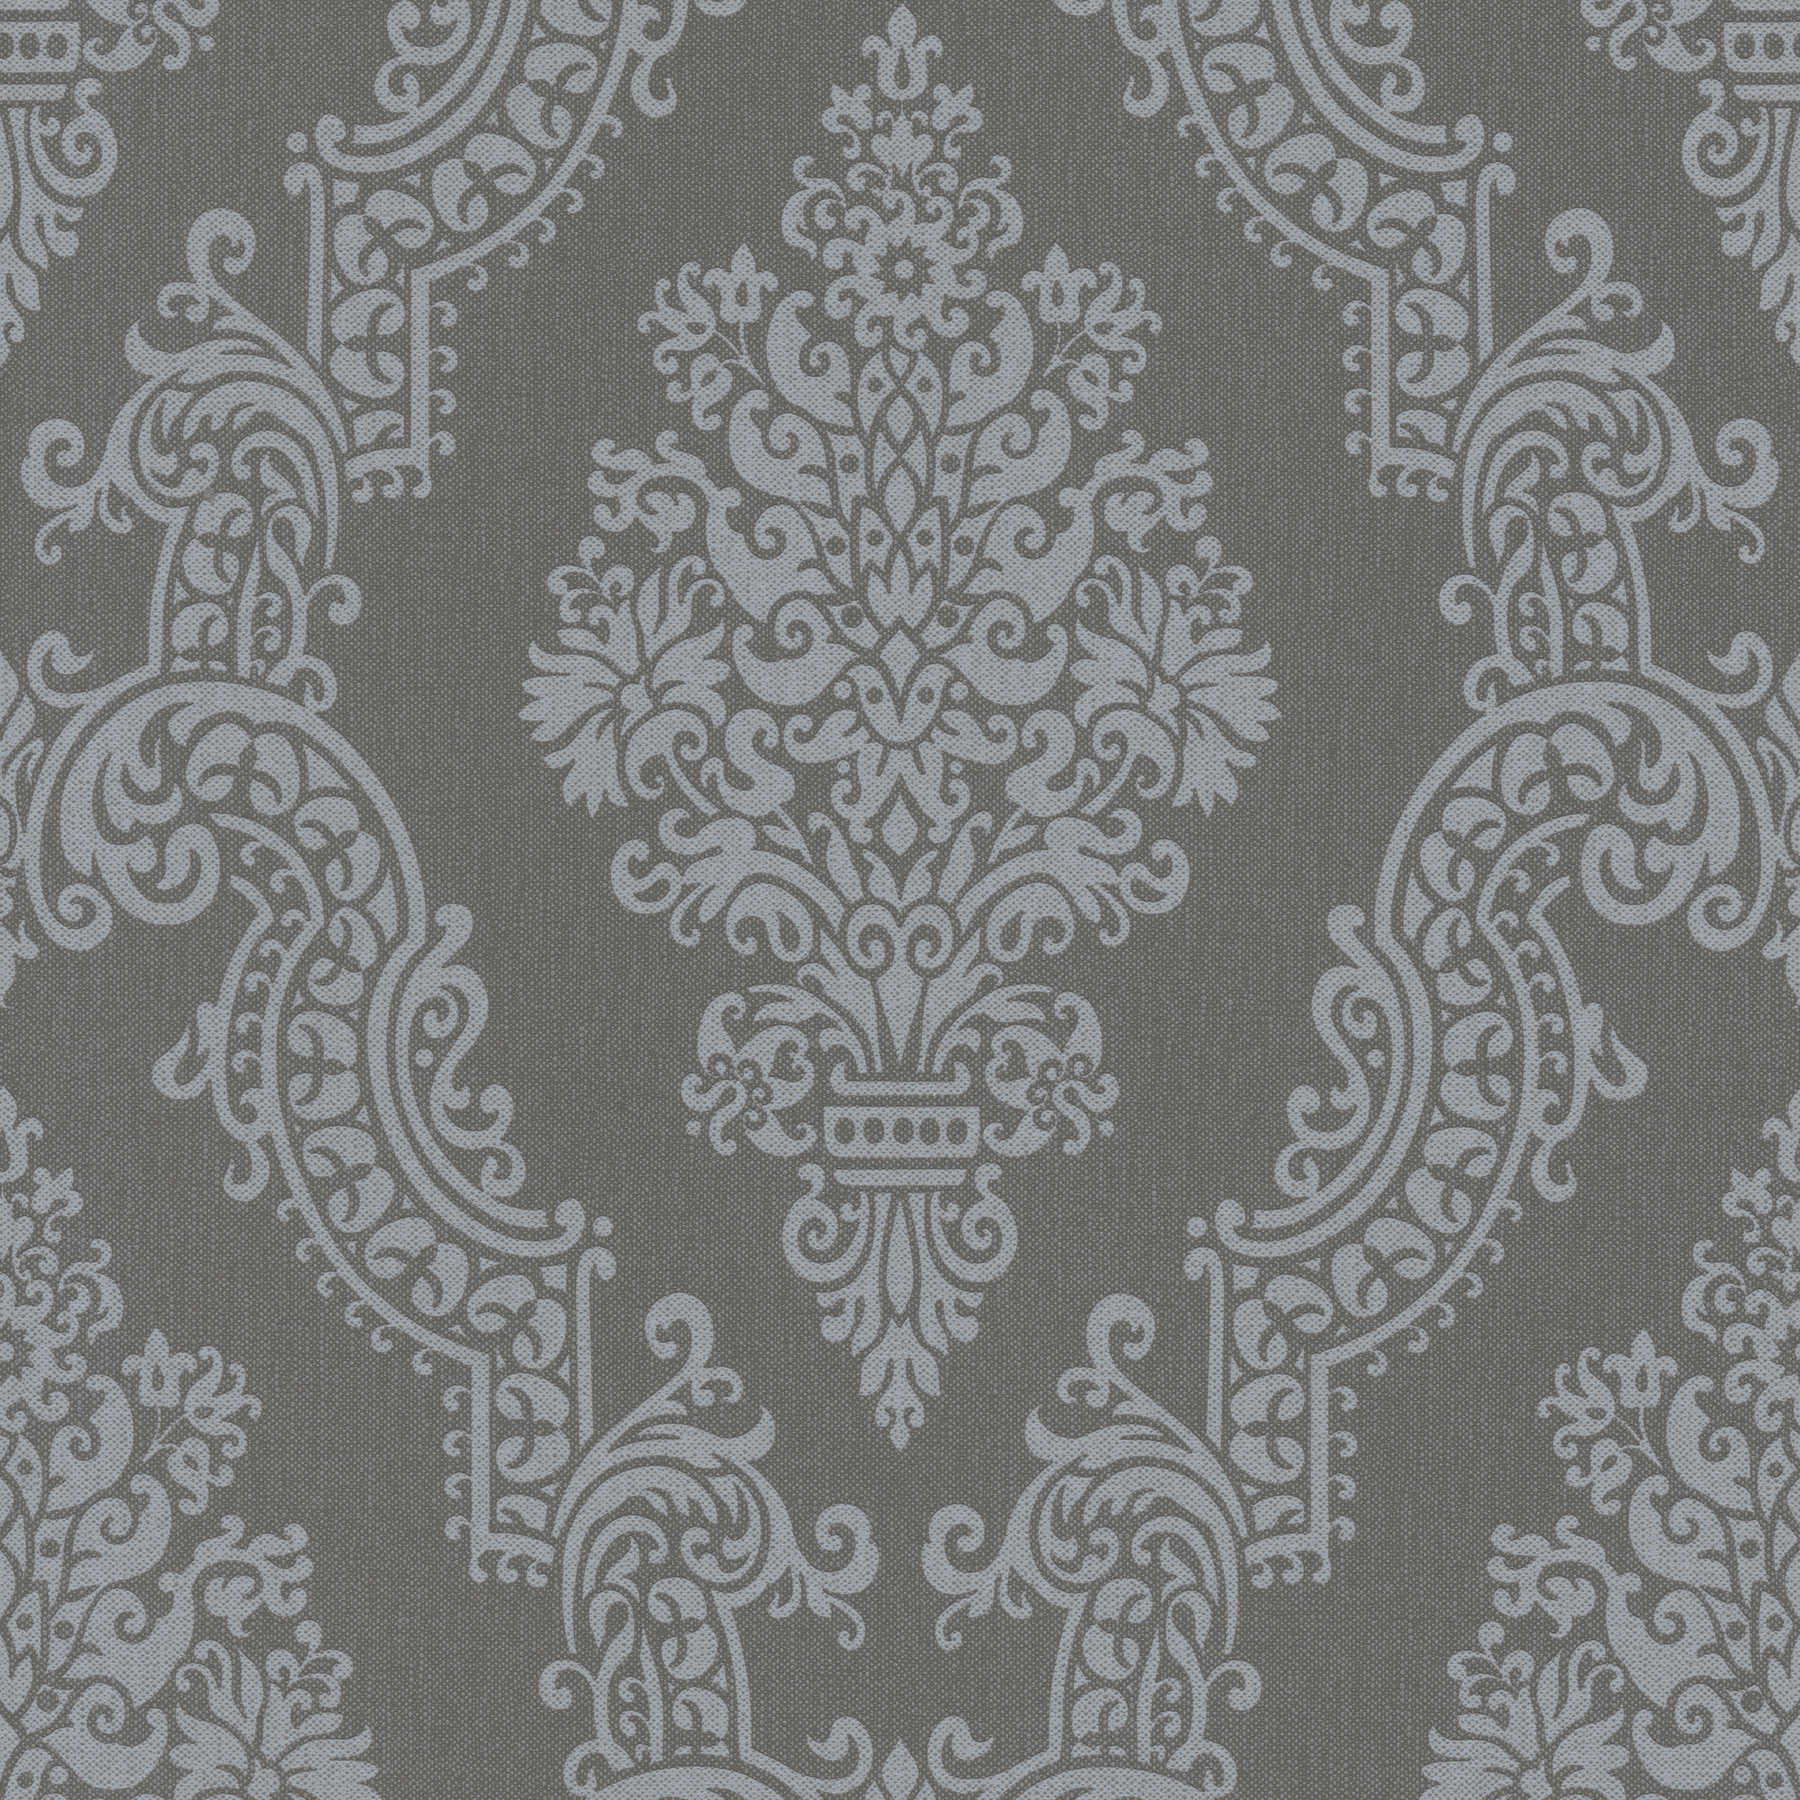 Classic ornament wallpaper with floral pattern - grey
